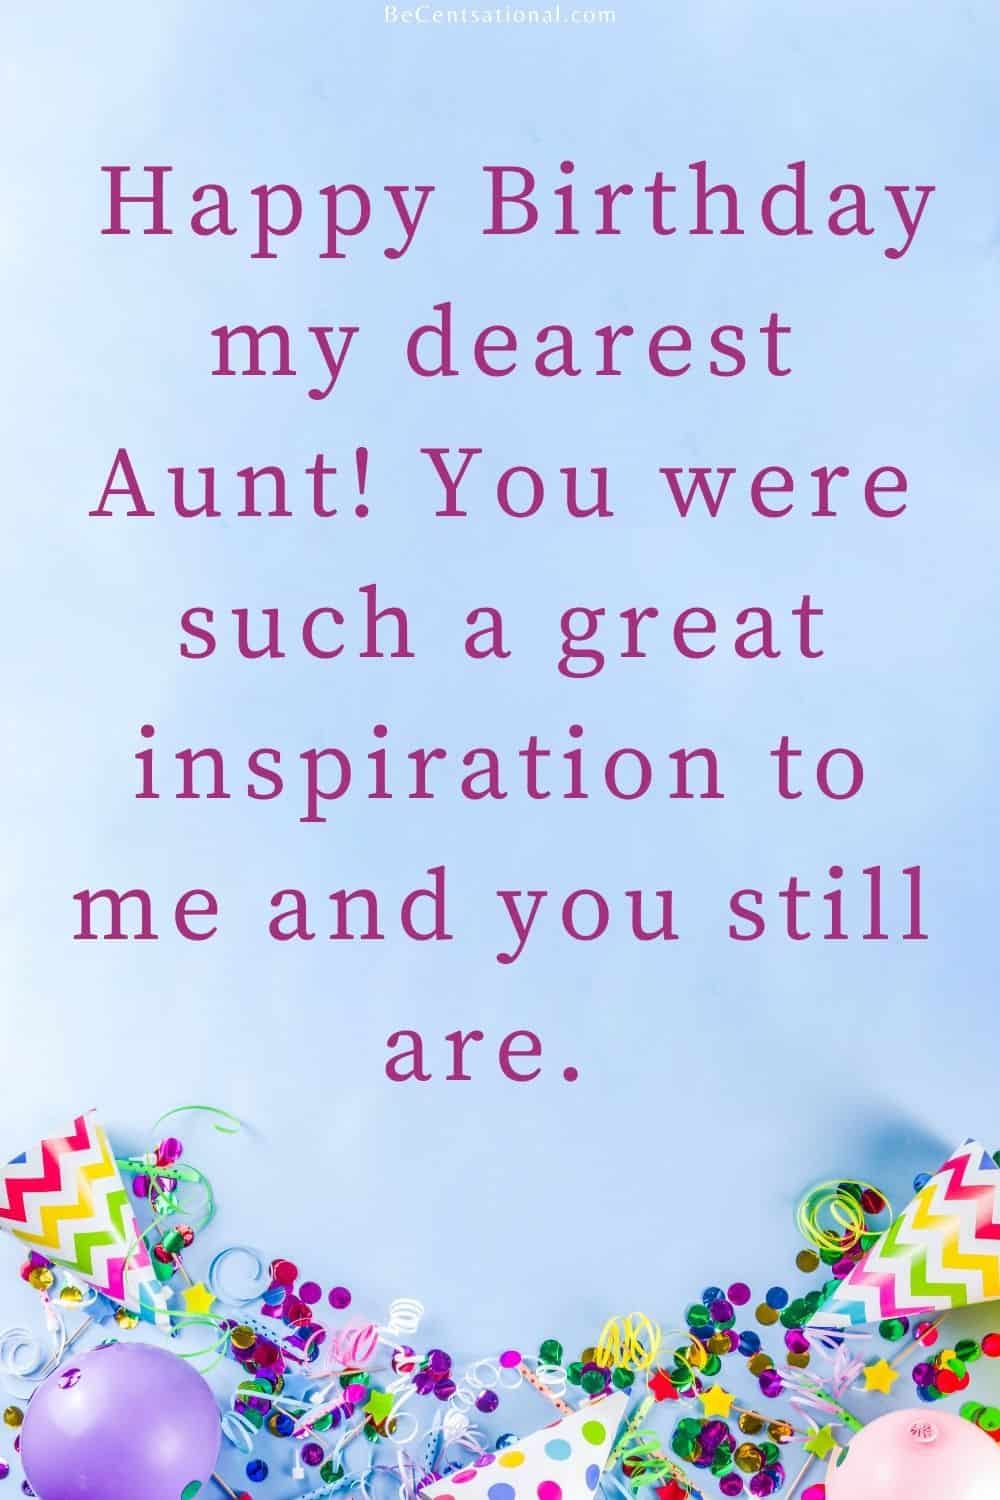 50 Heart Touching Birthday Wishes for Aunt - Be Centsational